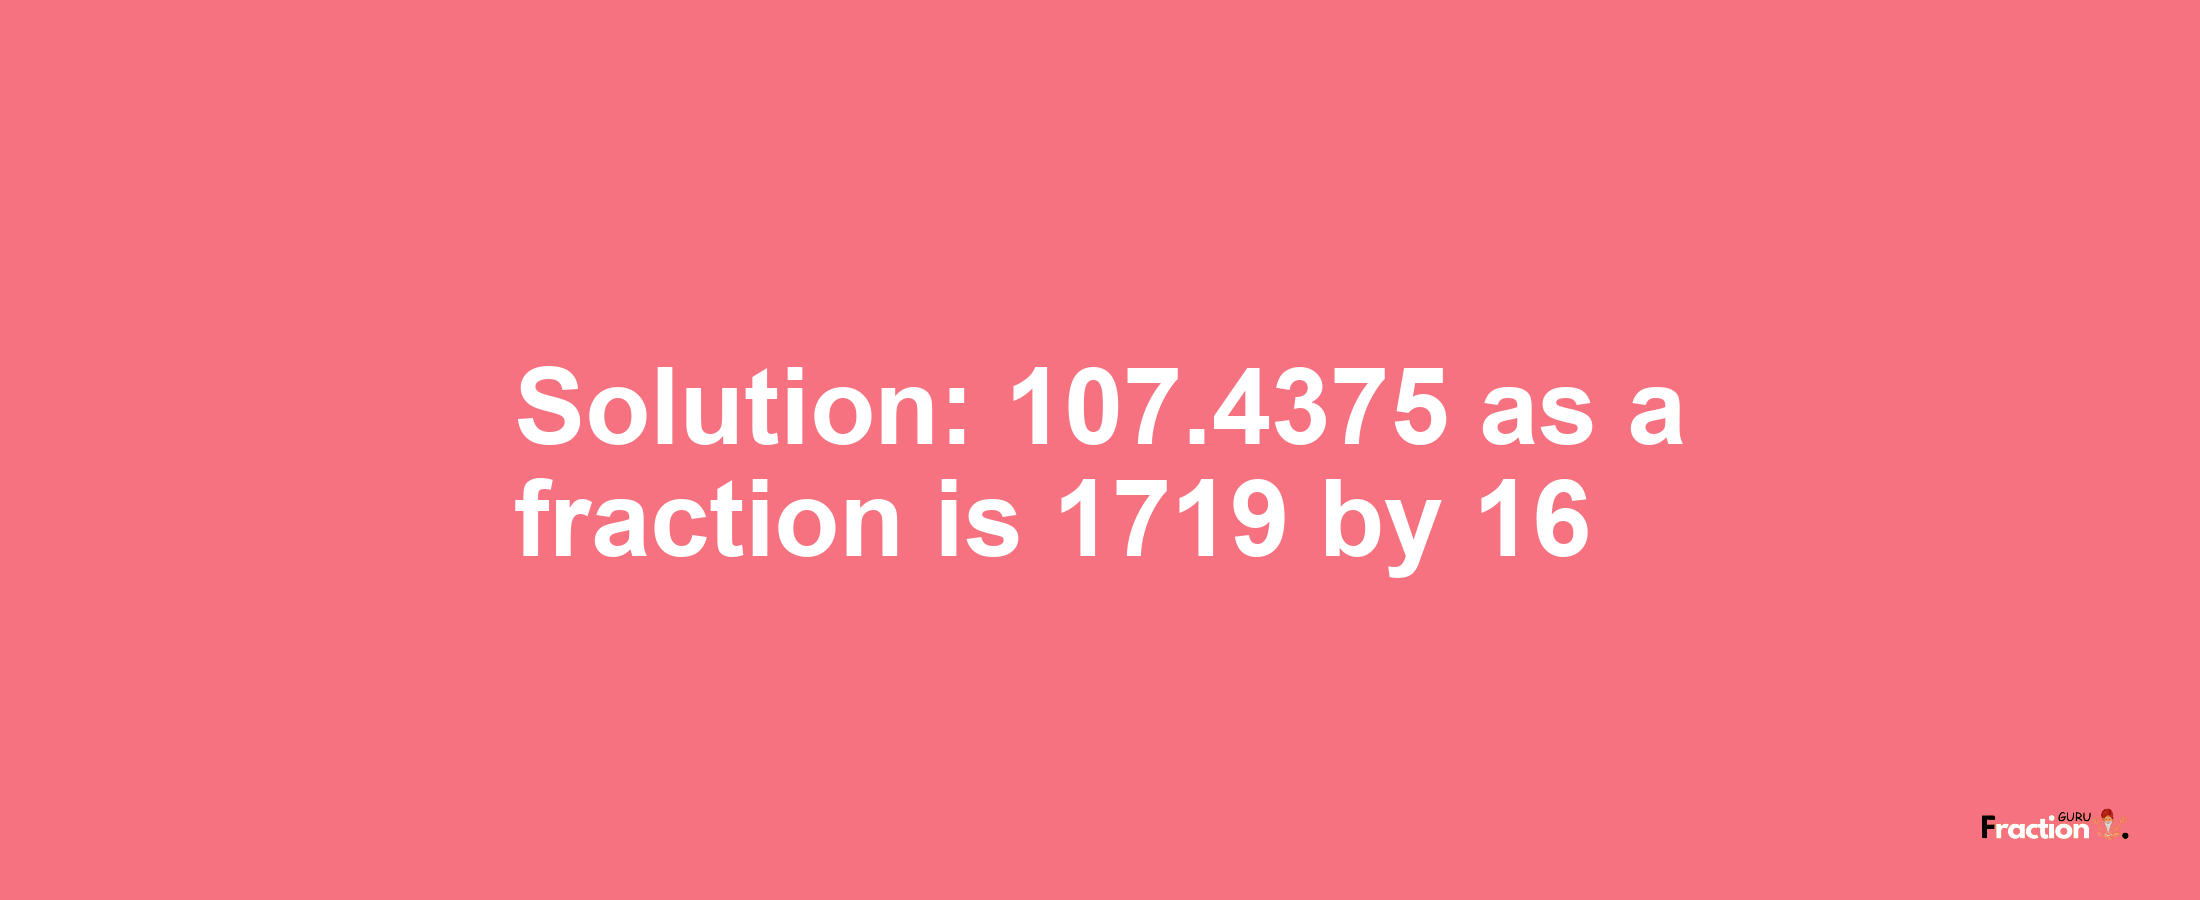 Solution:107.4375 as a fraction is 1719/16